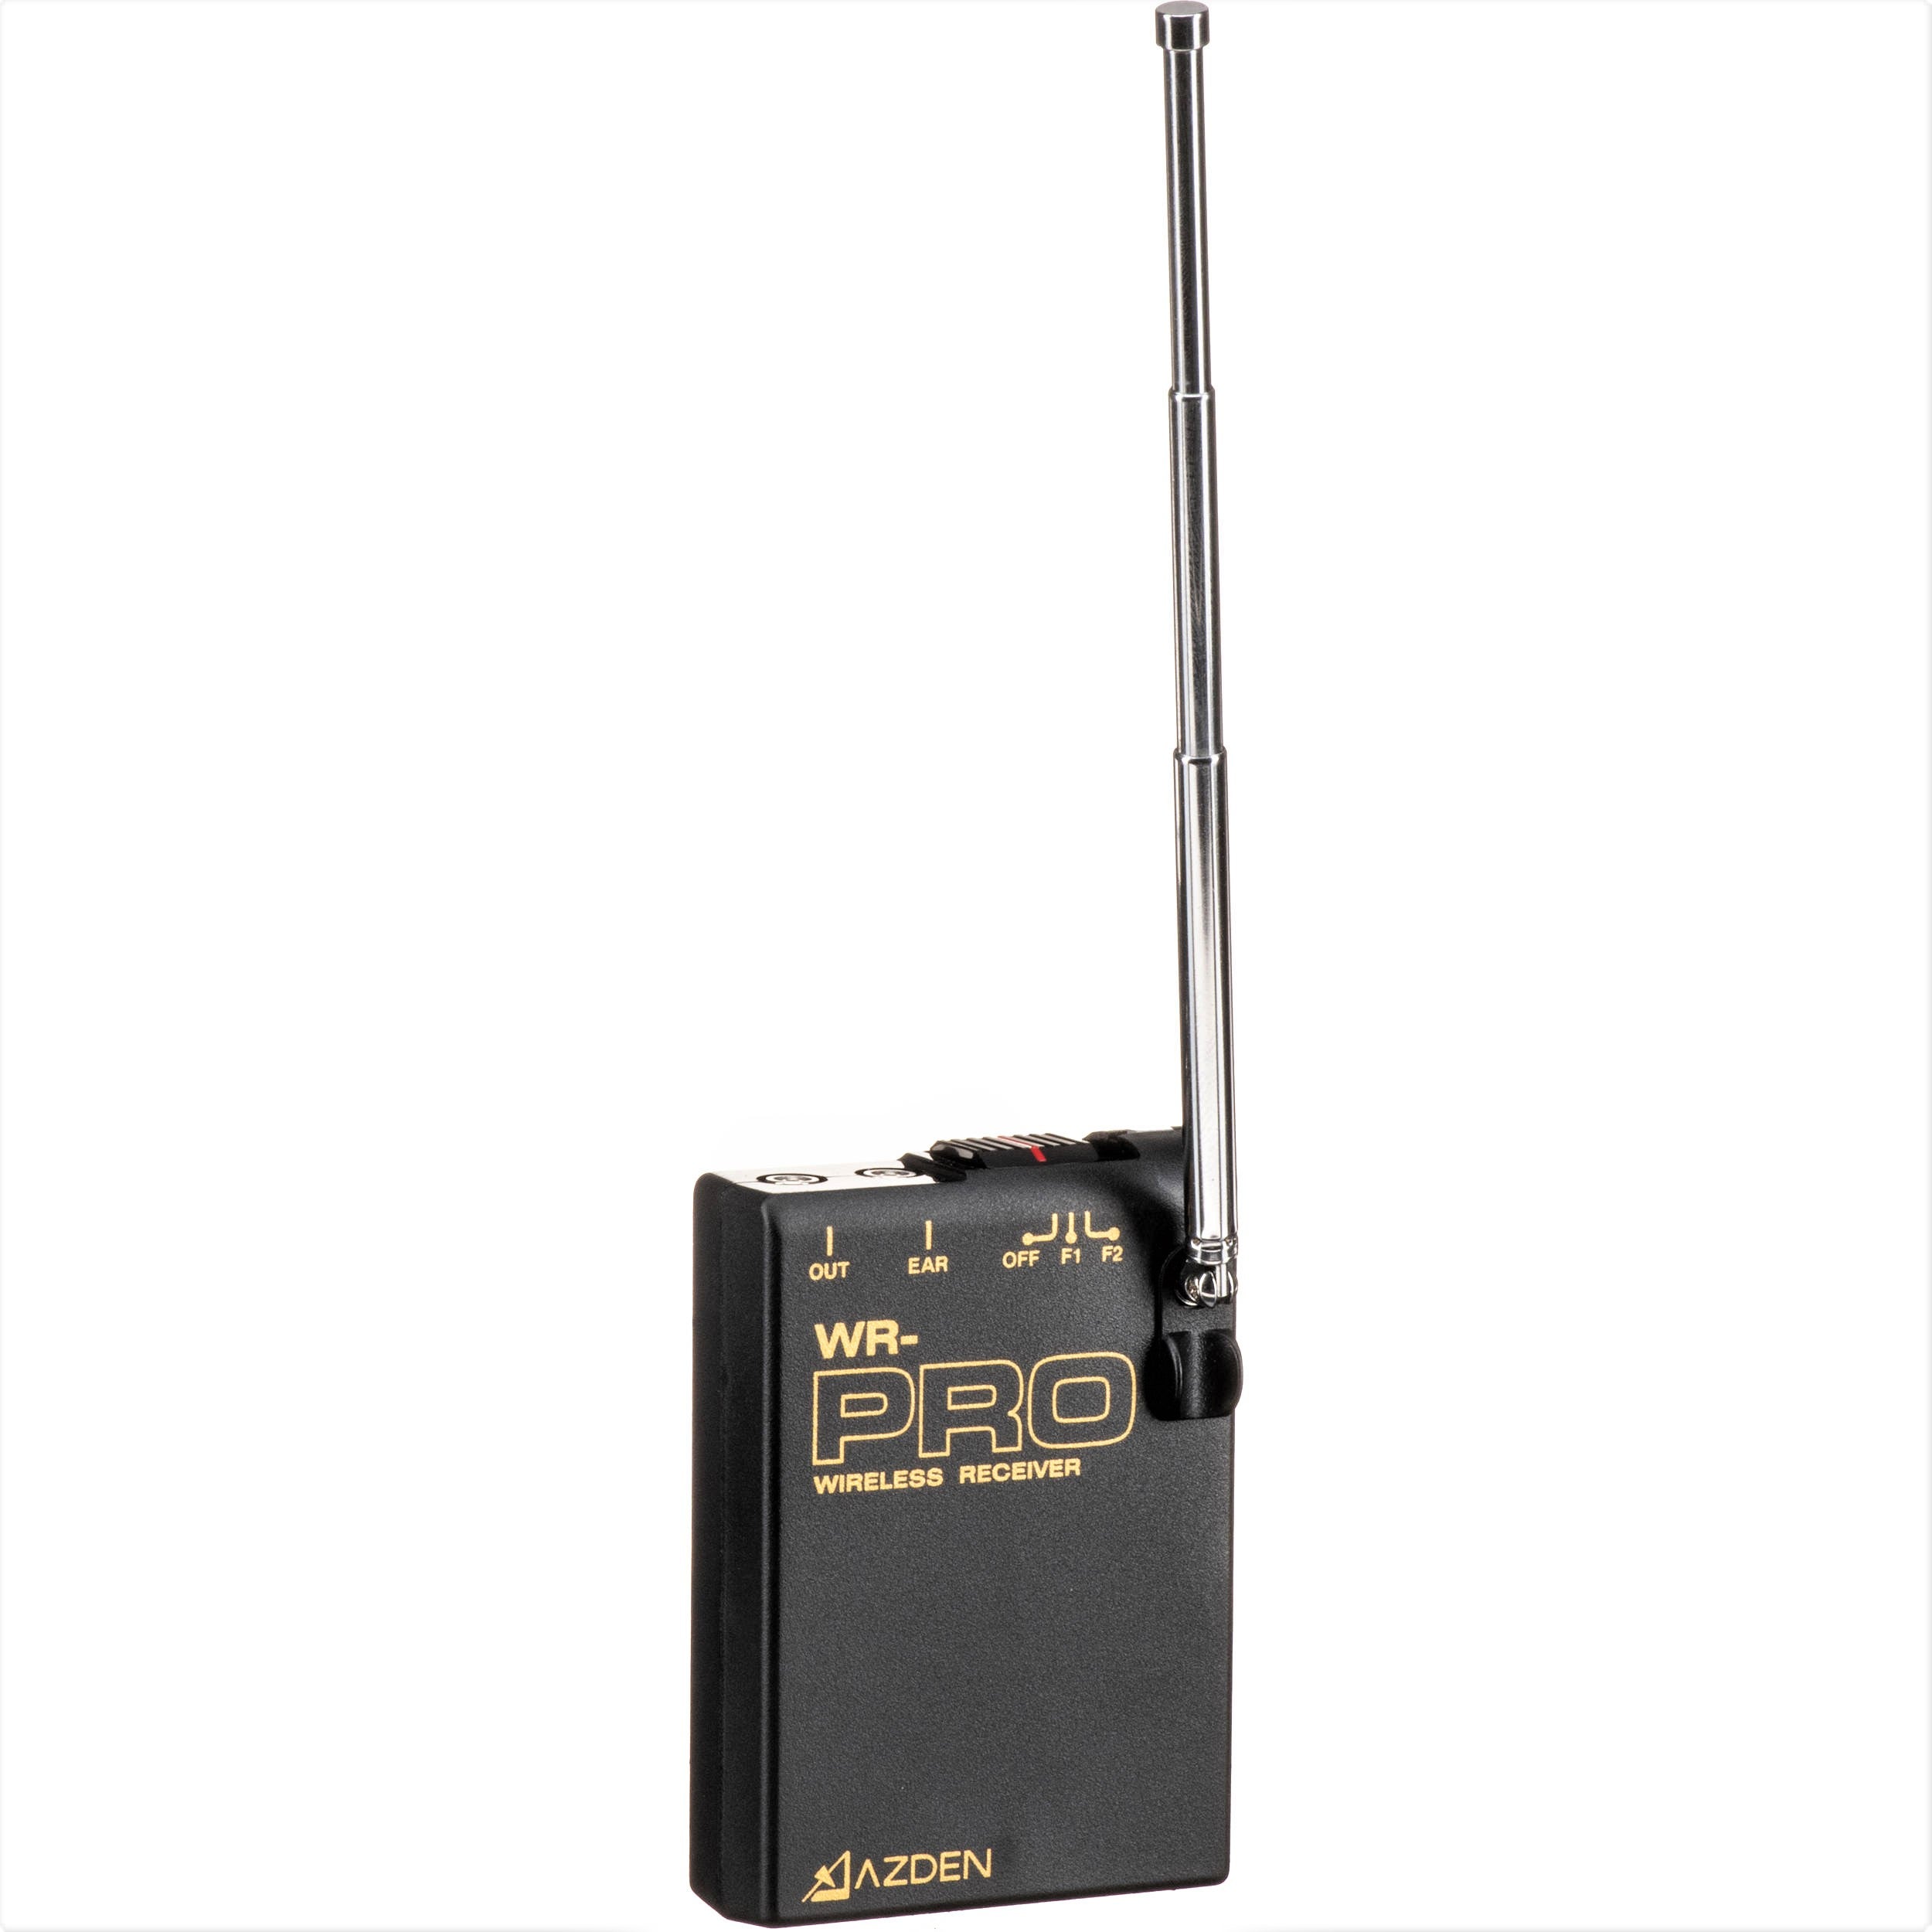 Azden WMS-PRO+i VHF Wireless Microphone System for Smartphones